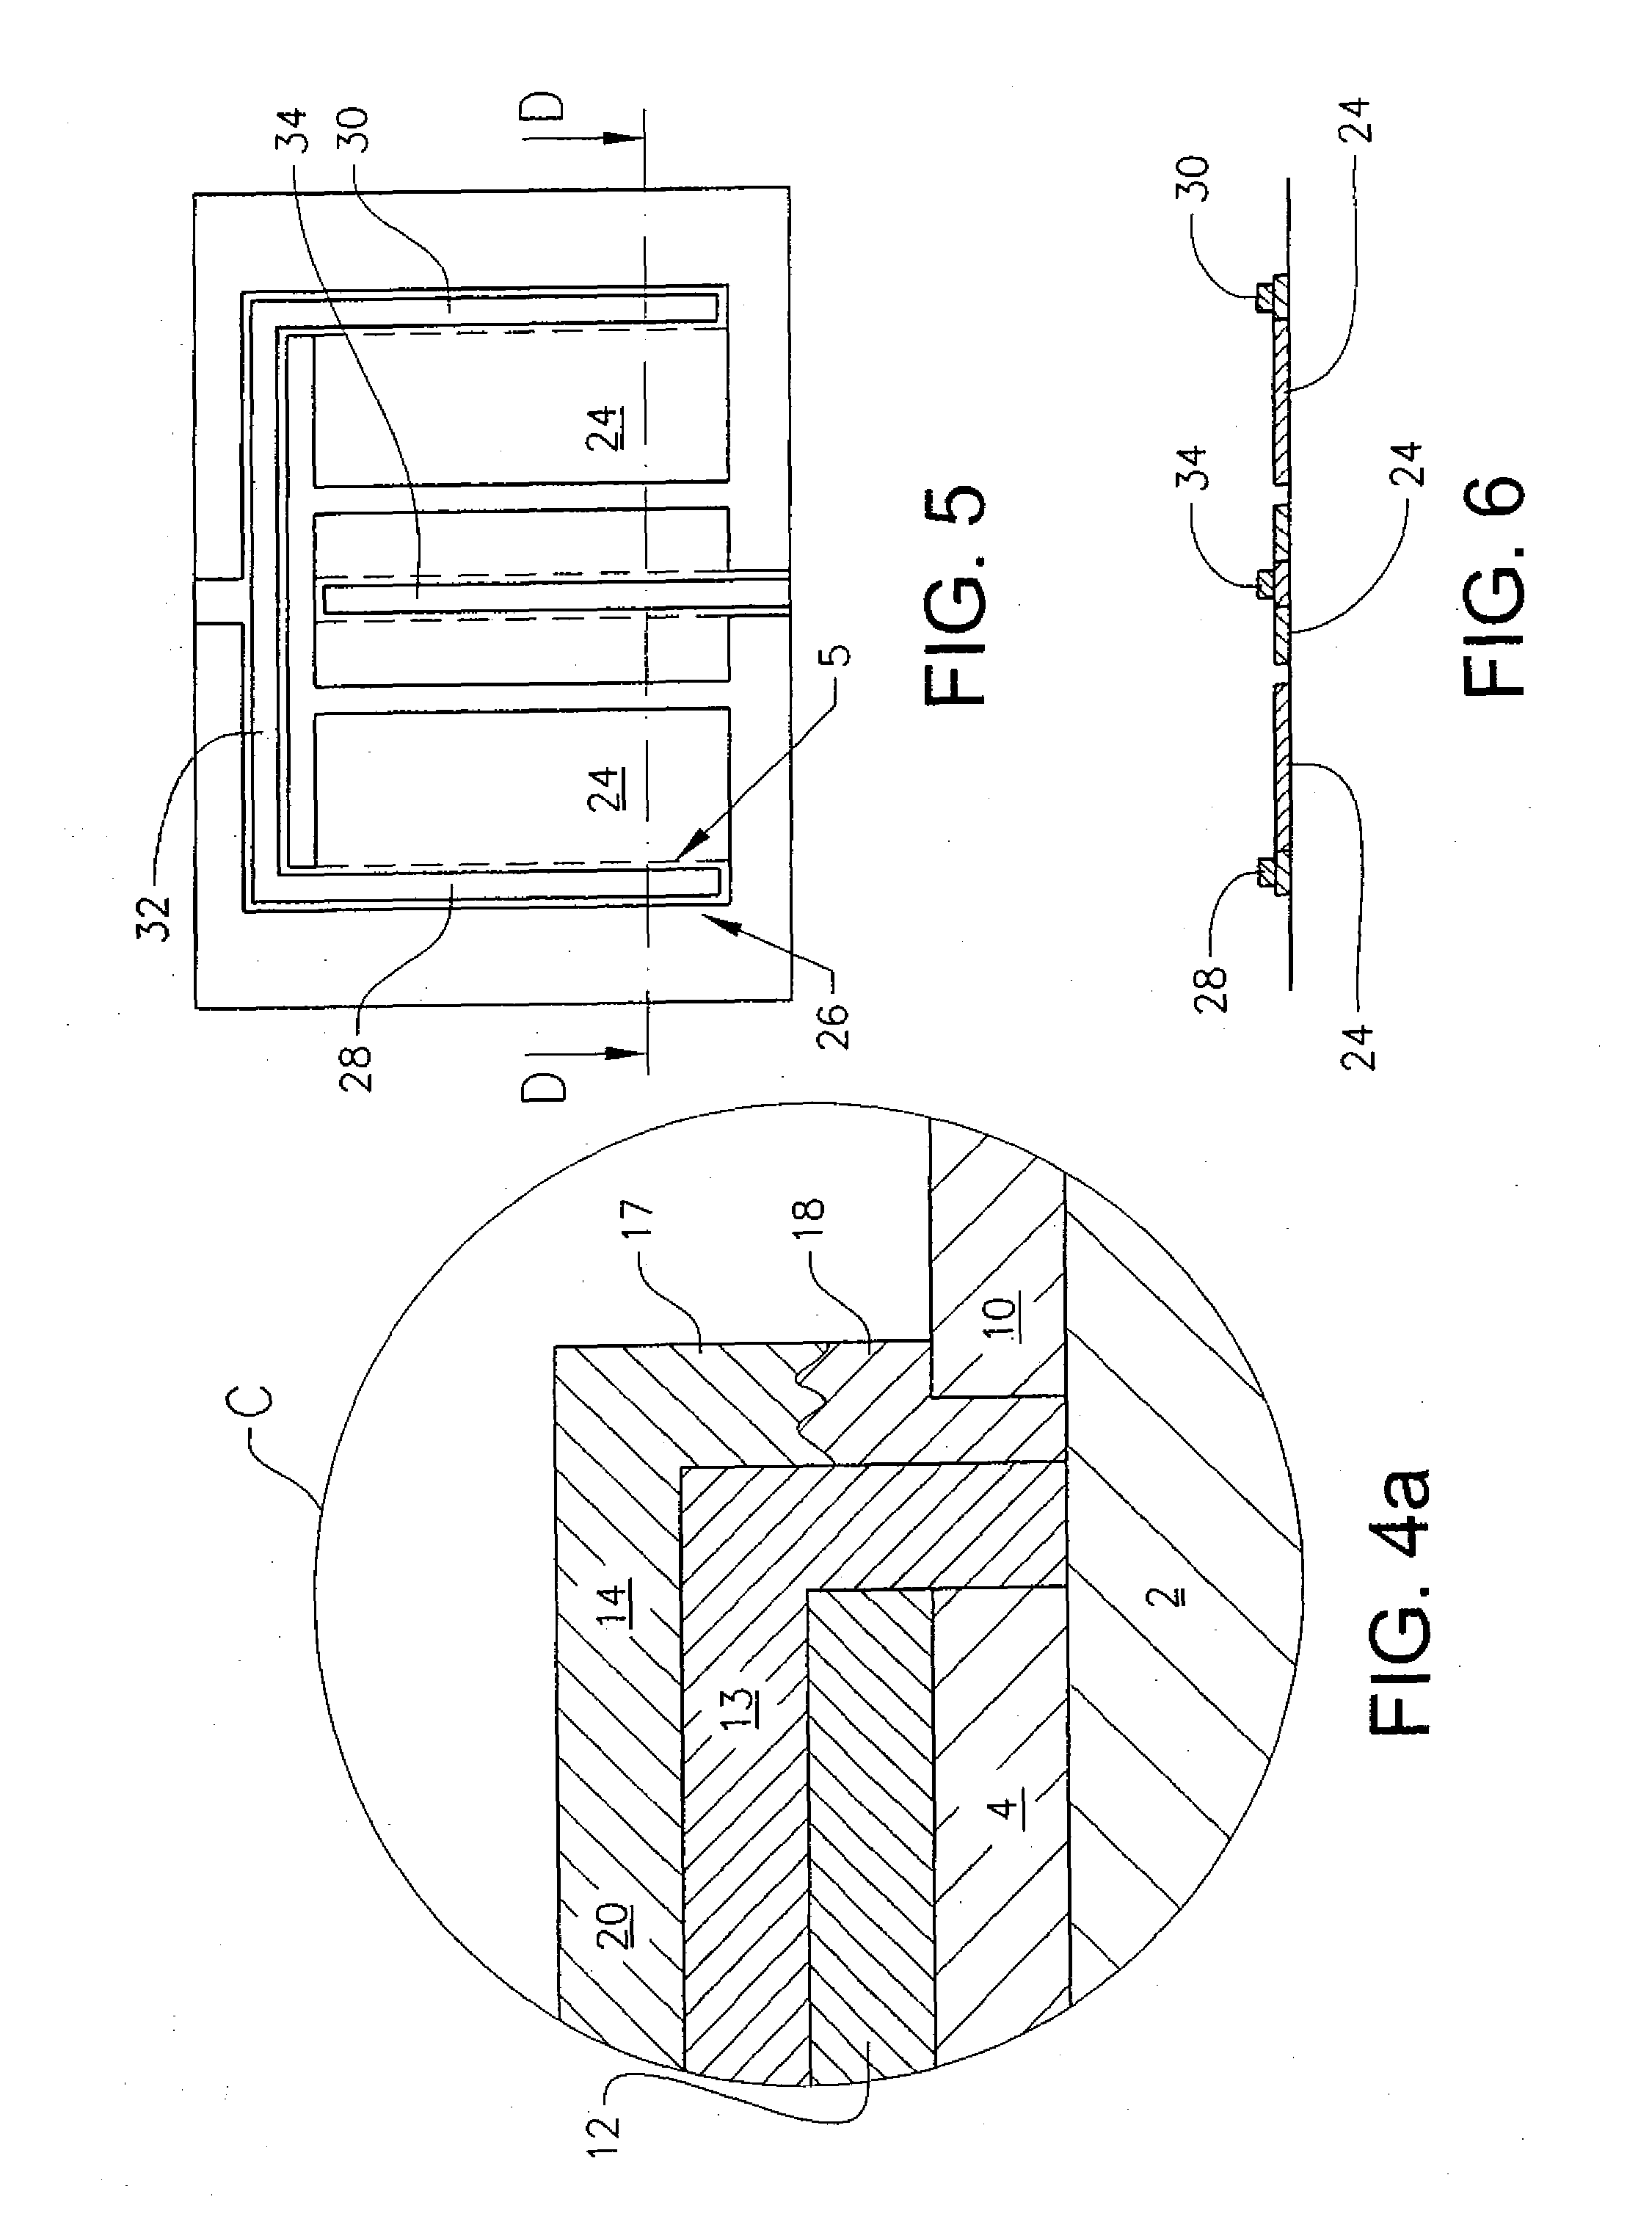 Sealed Monolithic Photo-Electrochemical System and a Method for Manufacturing a Sealed Monolithic Photo Electrochemical System